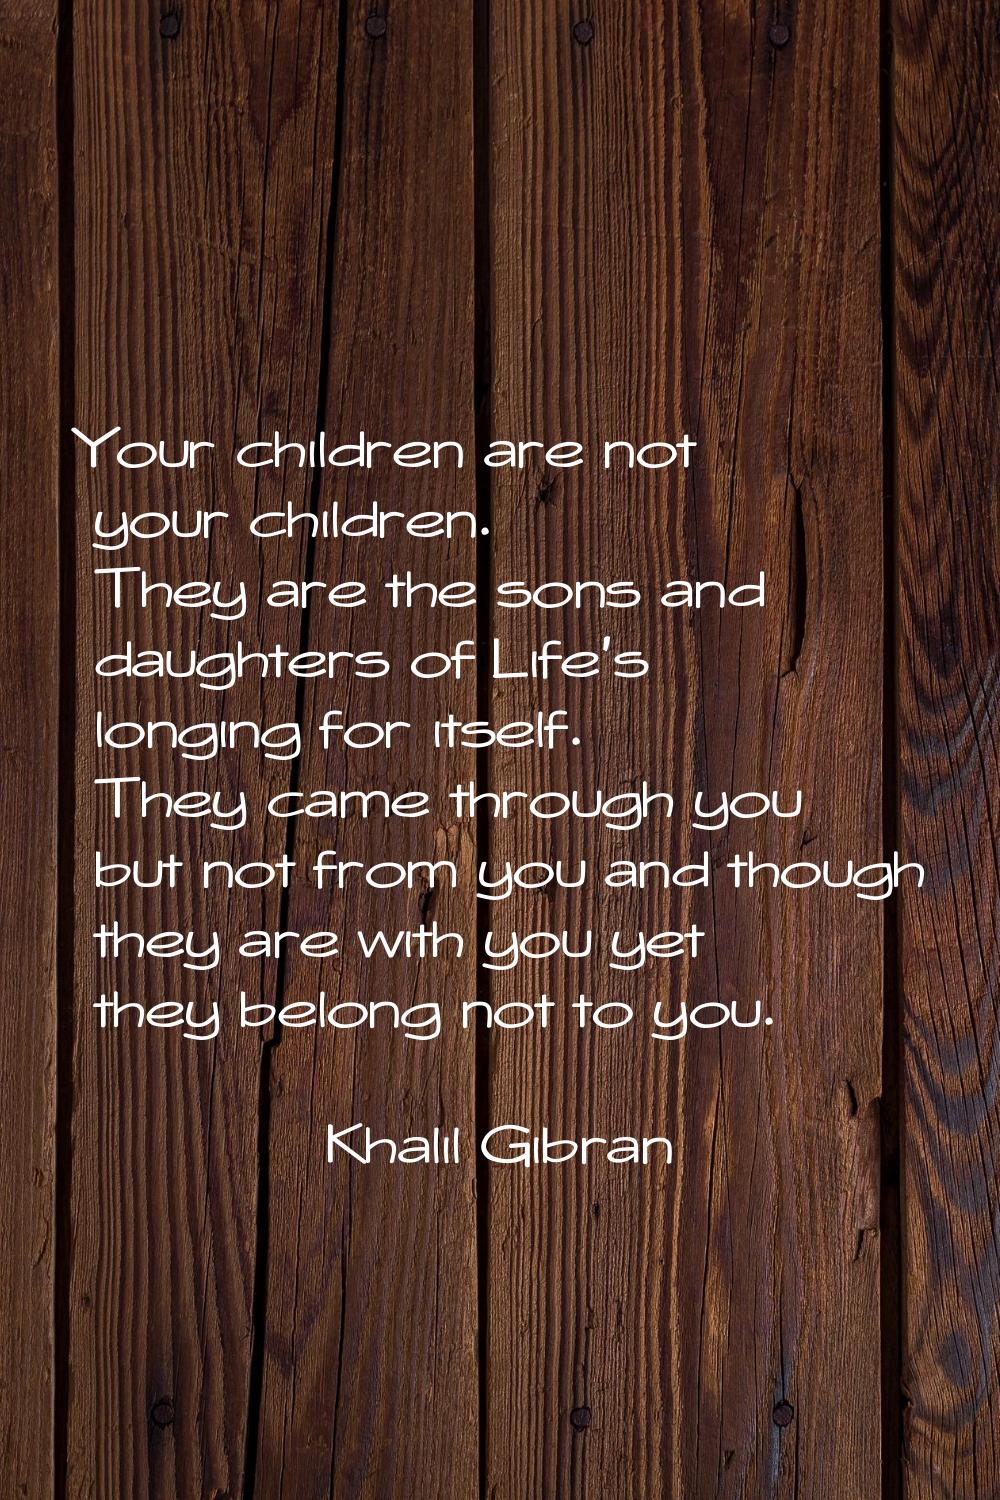 Your children are not your children. They are the sons and daughters of Life's longing for itself. 